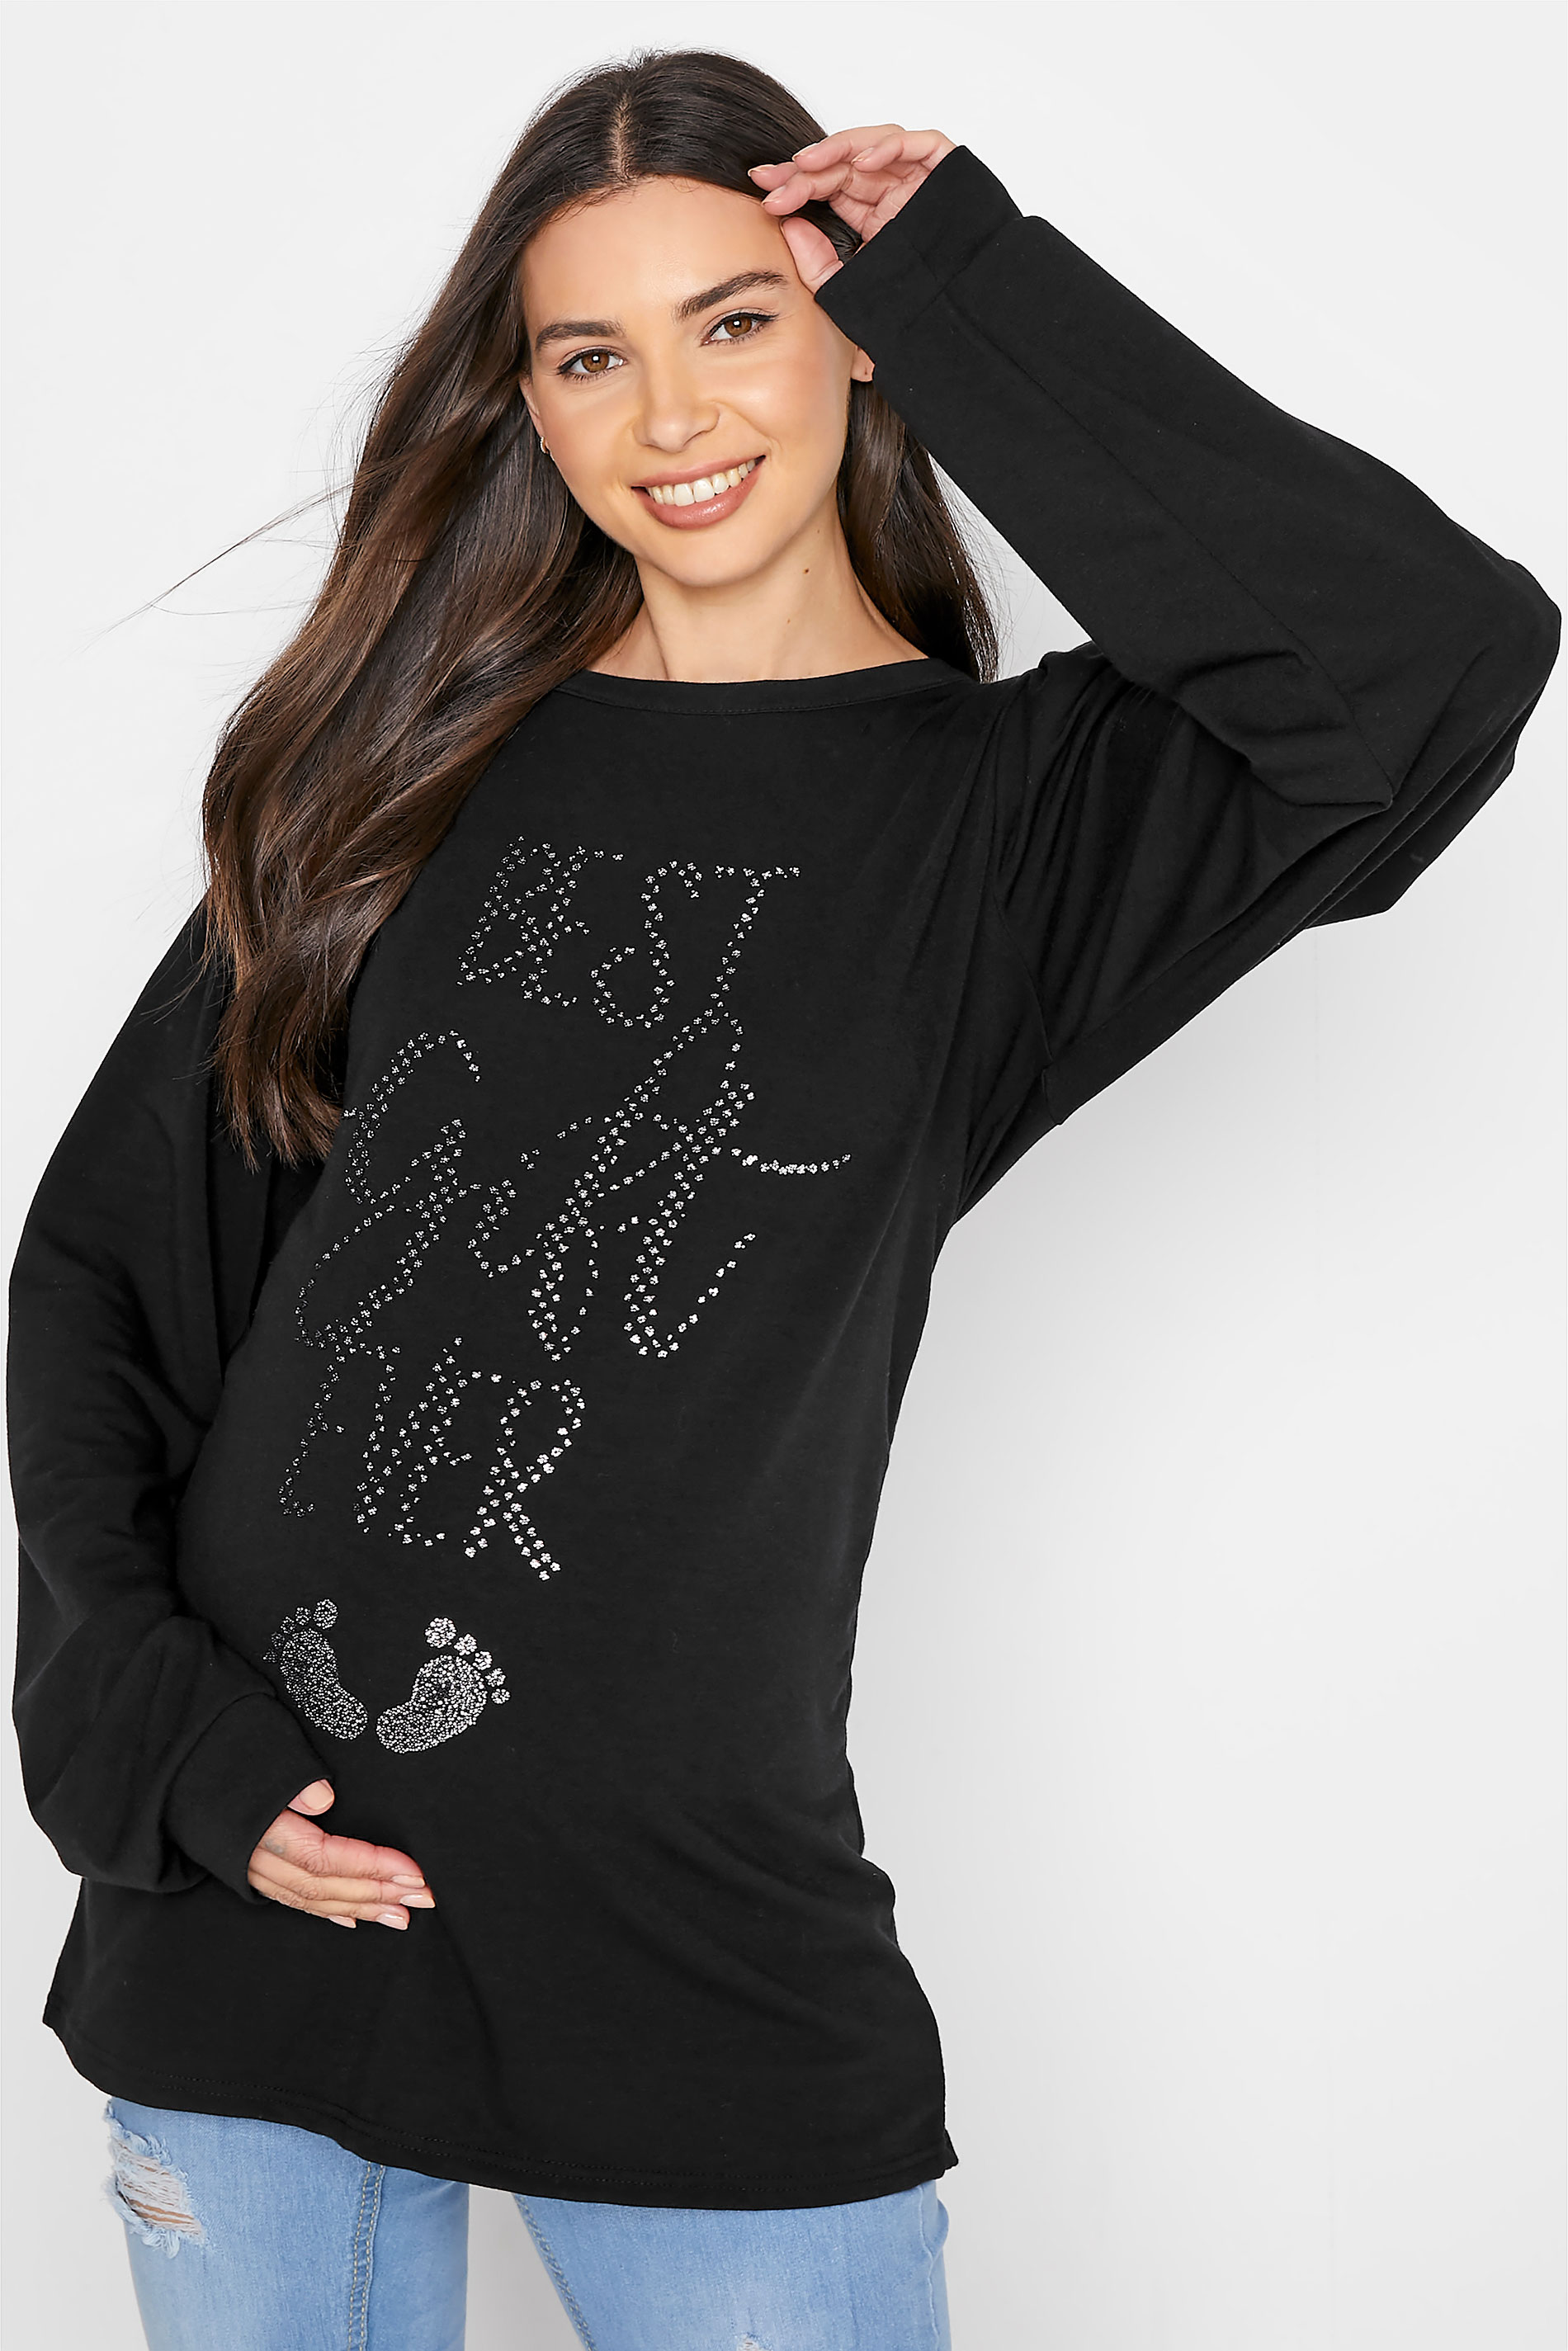 Tall Women's LTS Maternity Black 'Best Gift Ever' Embellished Slogan Christmas Top | Long Tall Sally 1